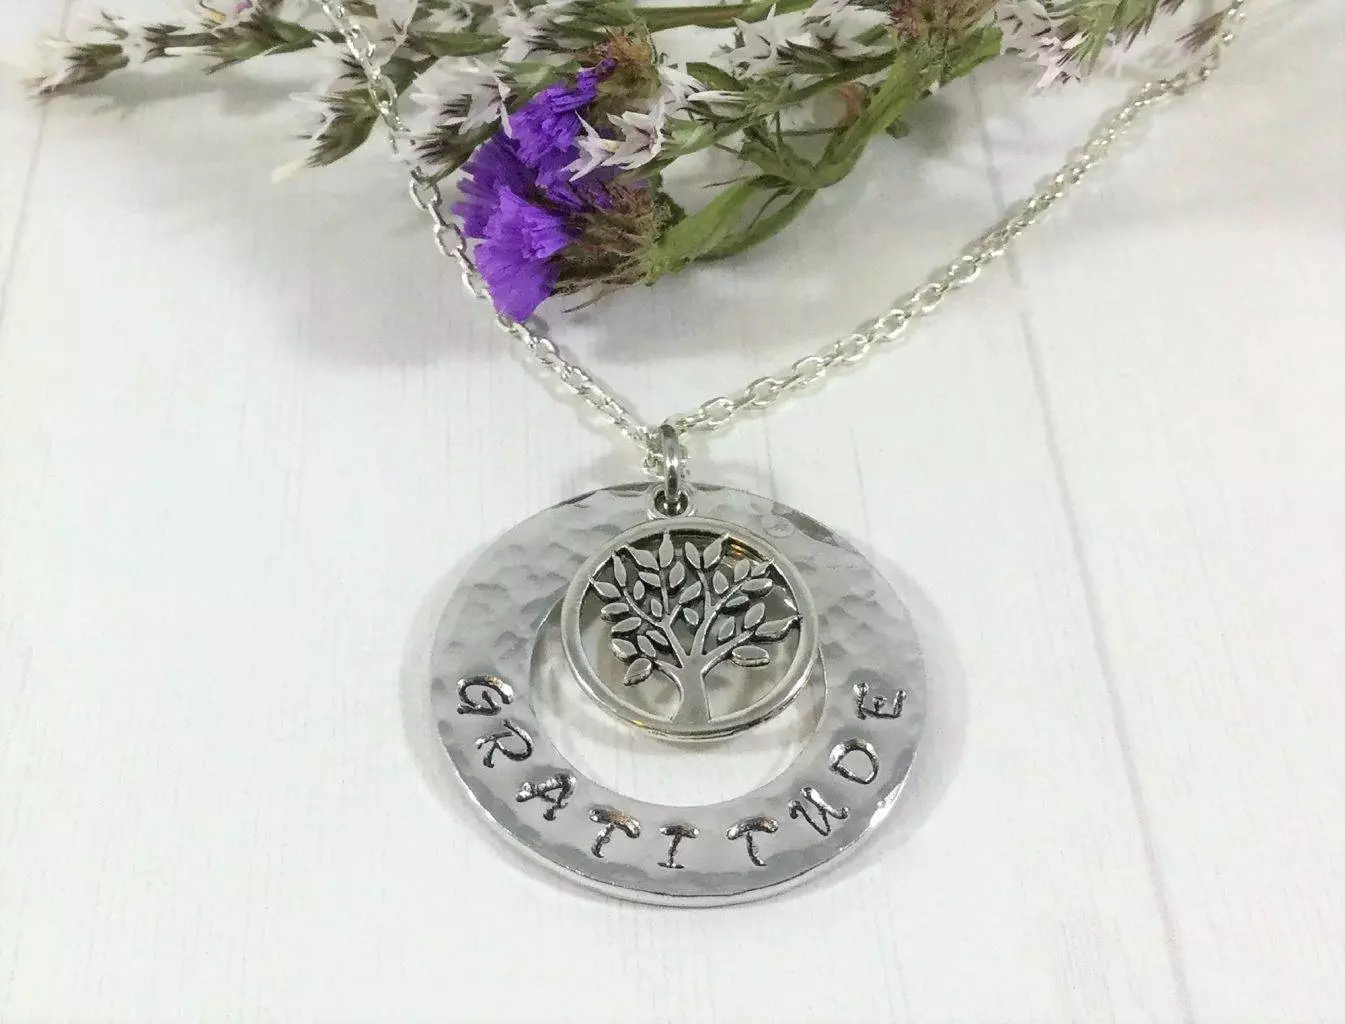 Gratitude Handstamped Necklace with Charm